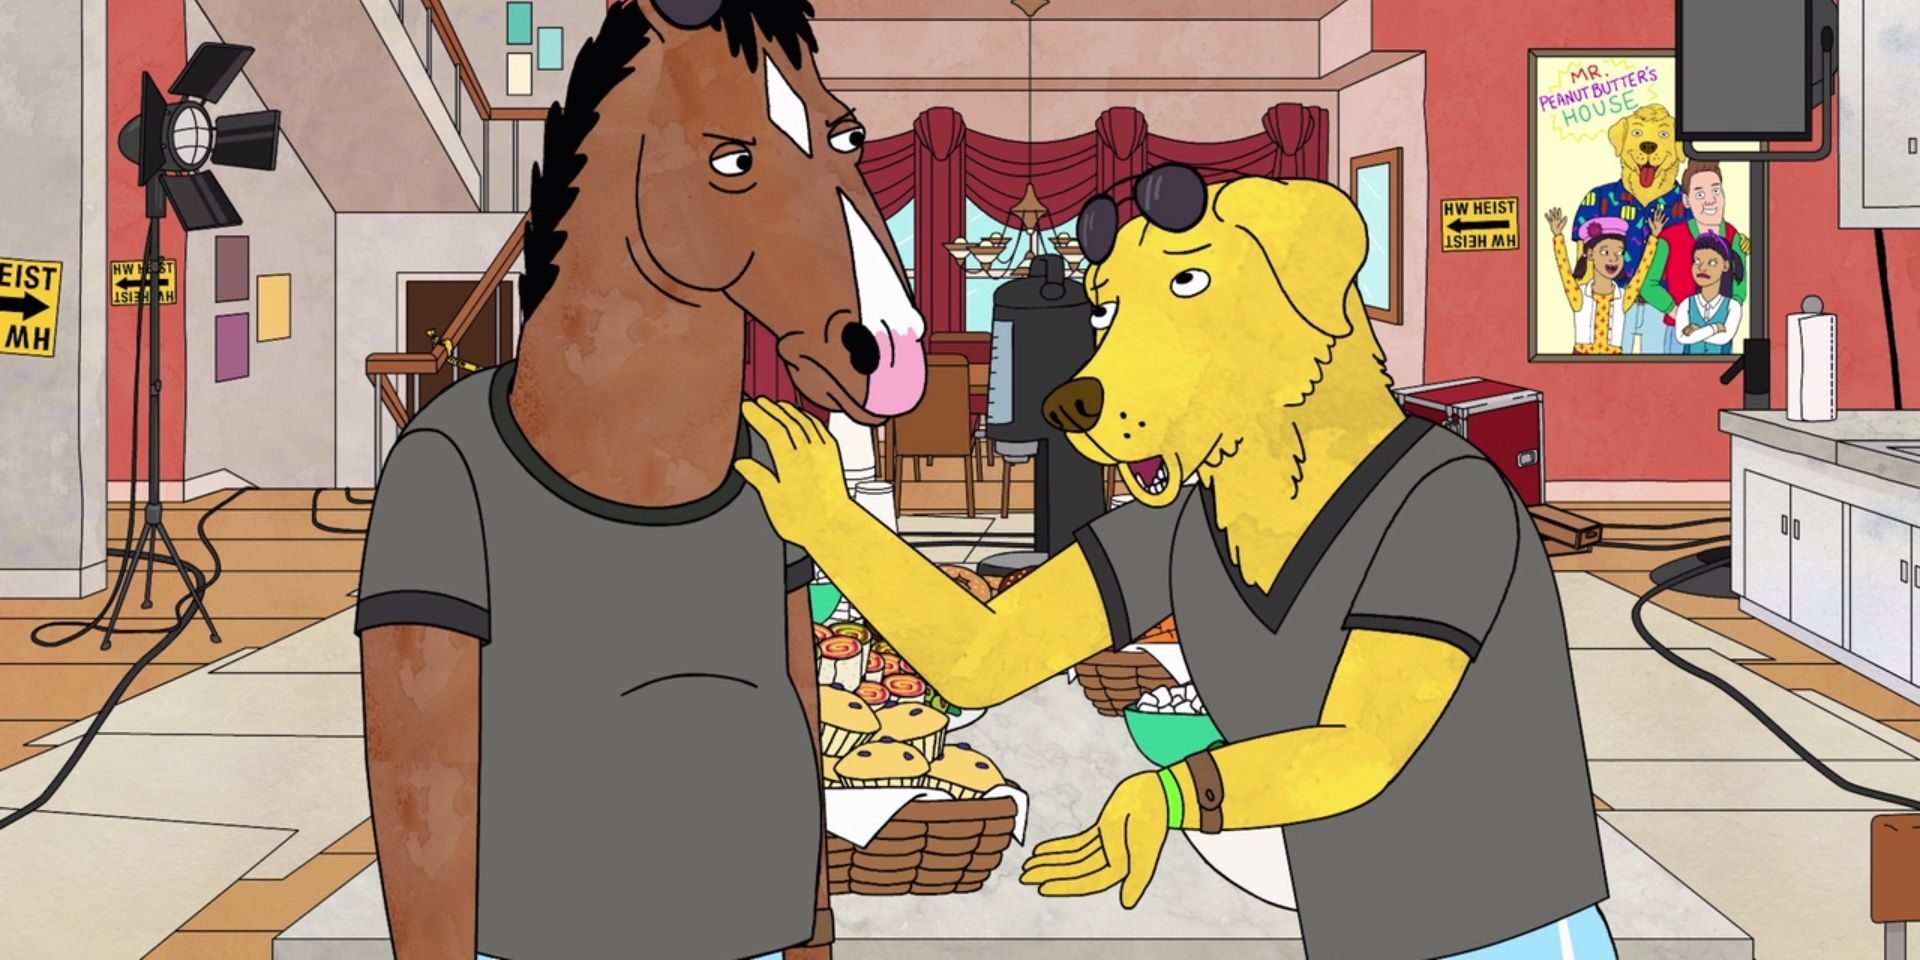 bojack and peanut butter talking to each other